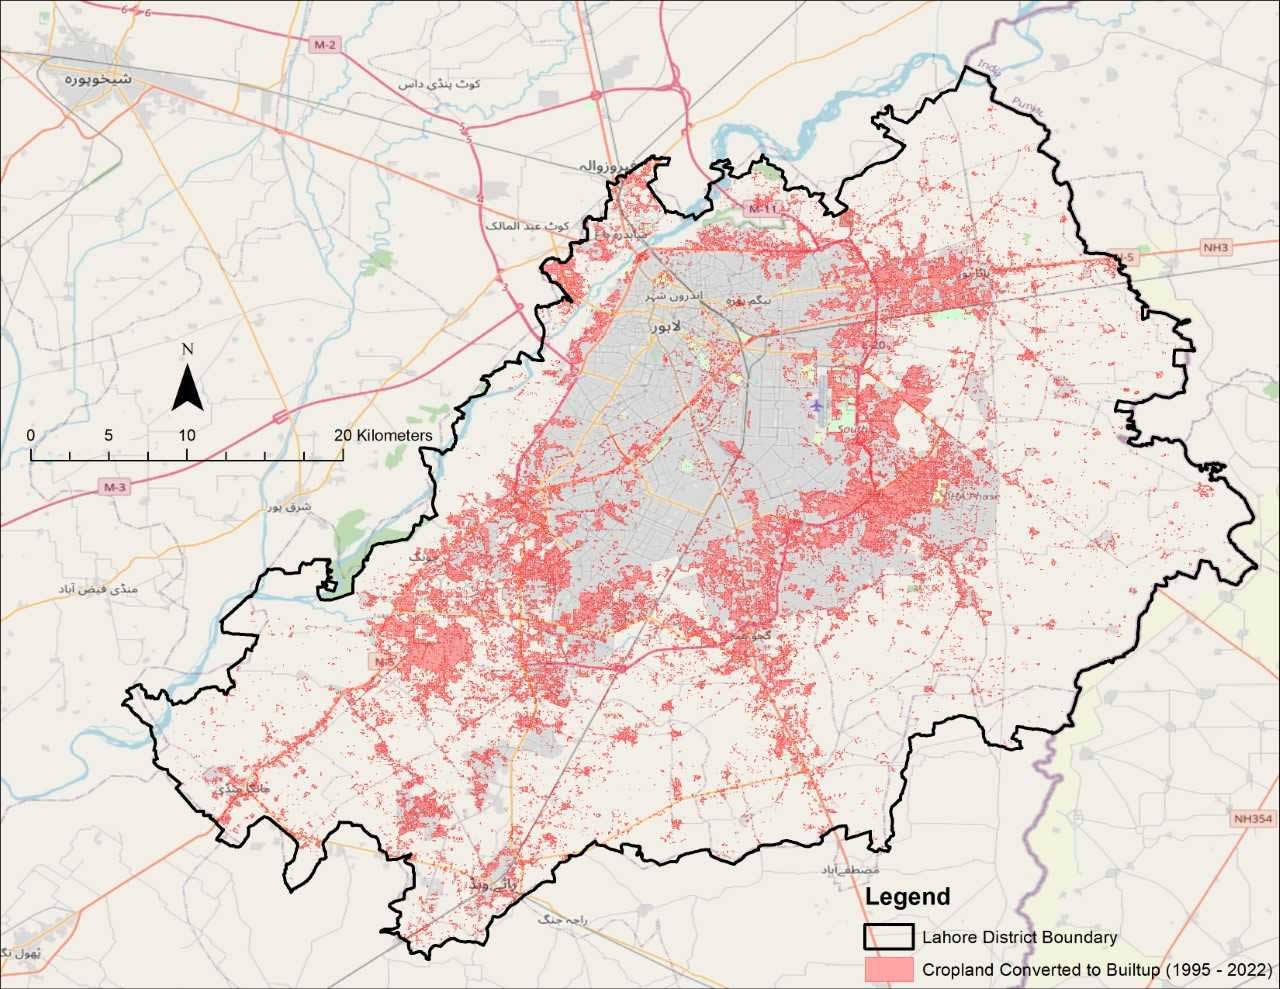 Crop land in Lahore that was converted to built-up area between 1995 and 2022. — Data via Urban Unit